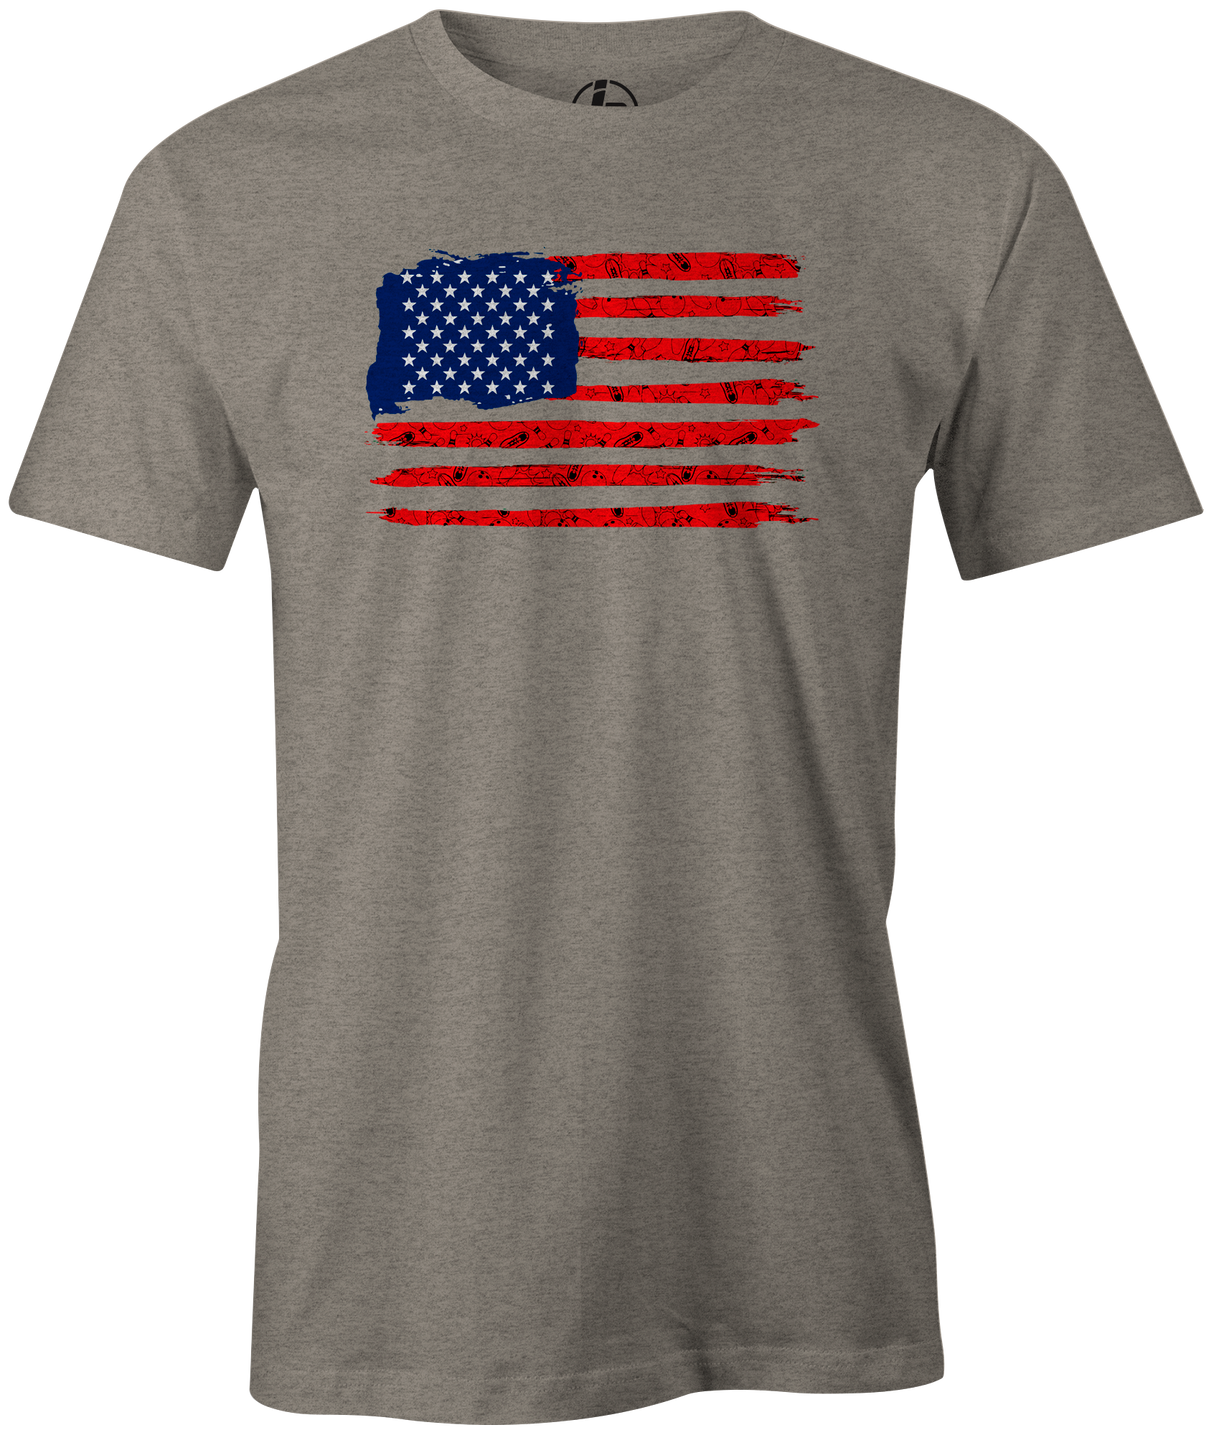 USA Bowling Men's T-shirt, White, Cool, tshirt, tee, tee-shirt, tee shirt, America, Team USA, Bowling USA Bowling! Enjoy this unique bowling themed American flag. Support Team USA with this cool, patriotic t-shirt! America. Tshirt, tee, tee-shirt, tee shirt. United States. Novelty. This is the perfect gift for any bowler looking to show some support for their country. Present. USBC Team USA. Comfortable. Free shipping. 